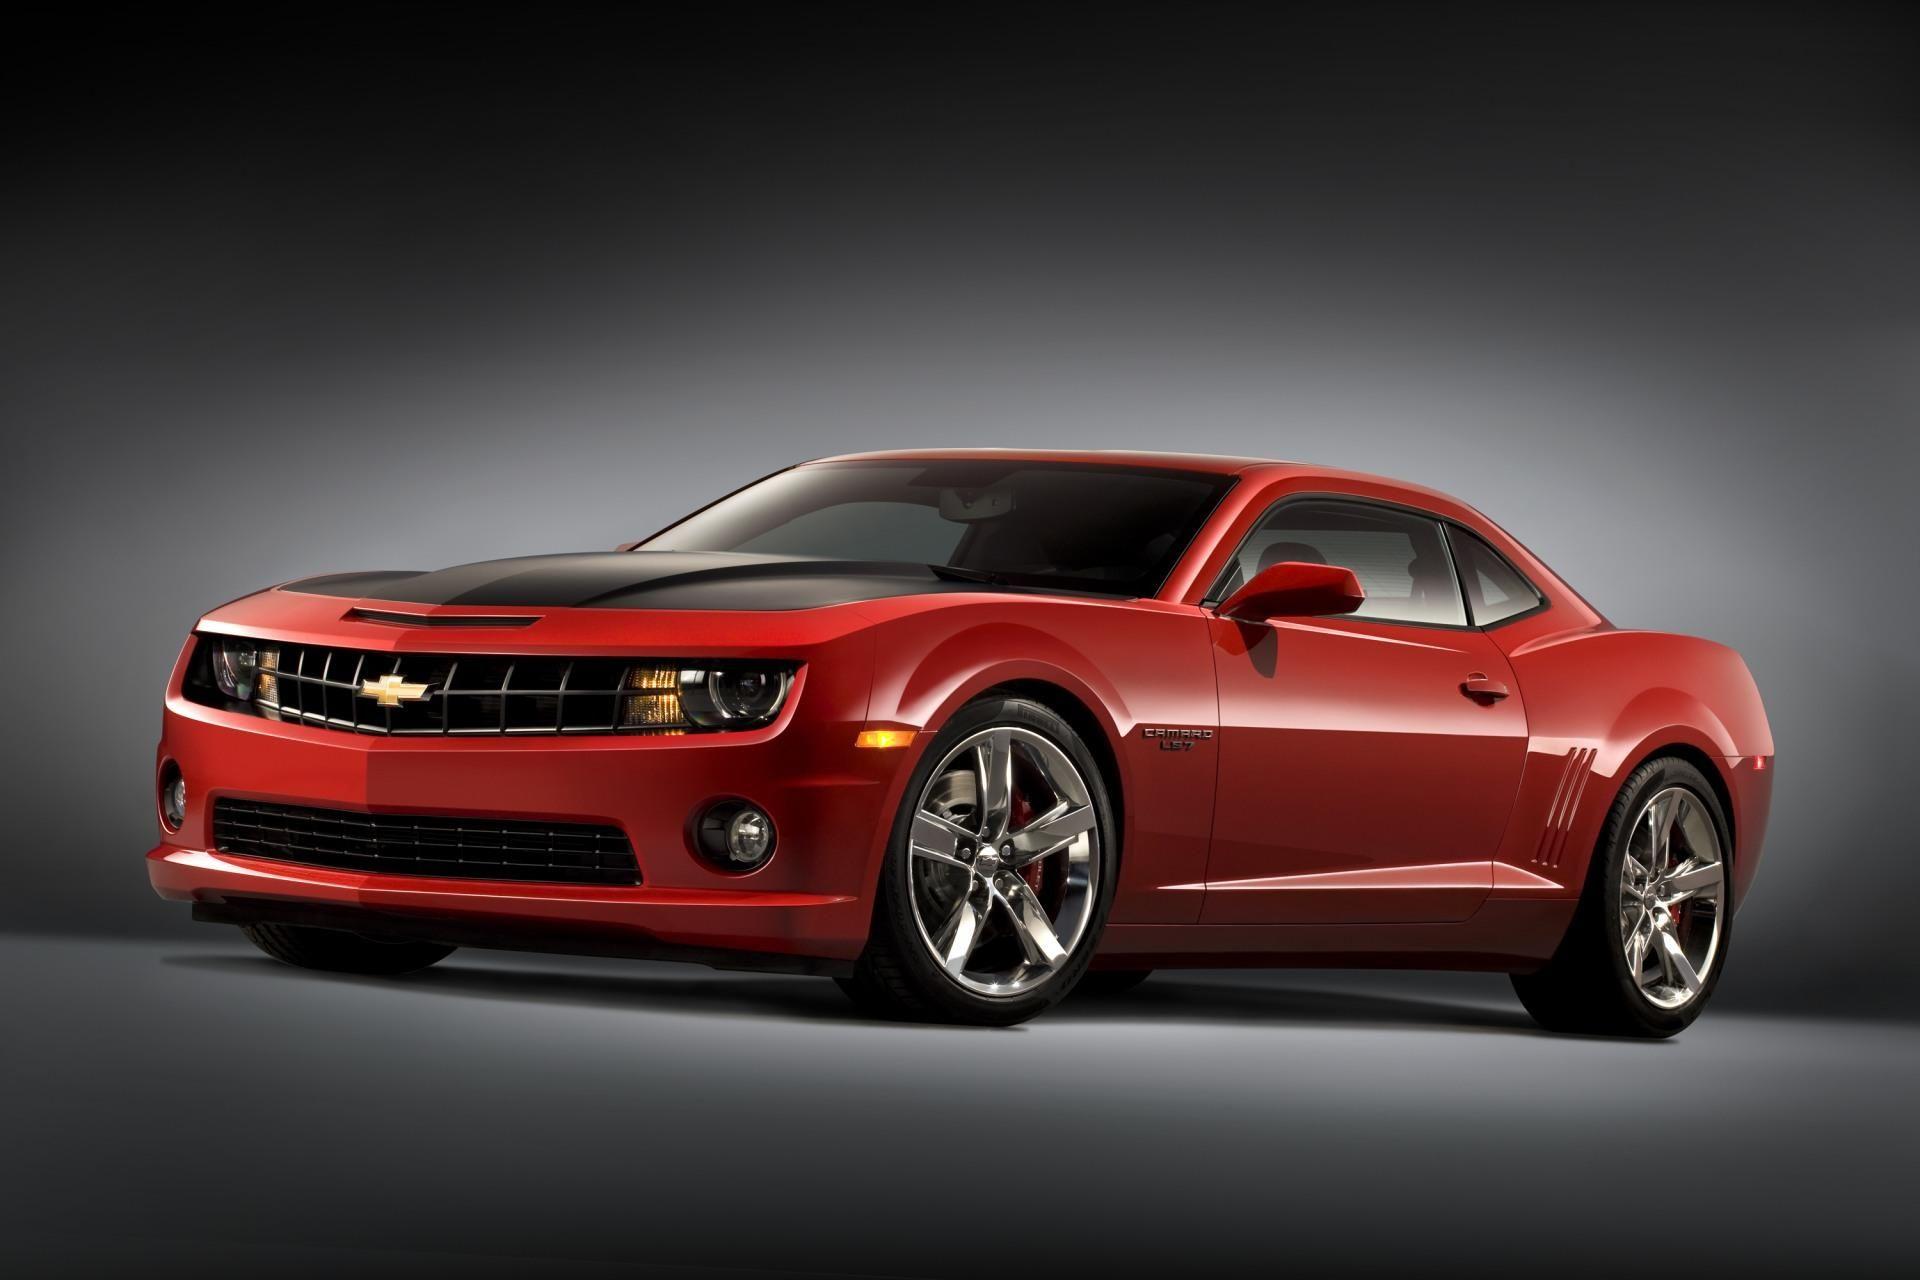 Chevrolet Camaro LS7 Concept News and Information